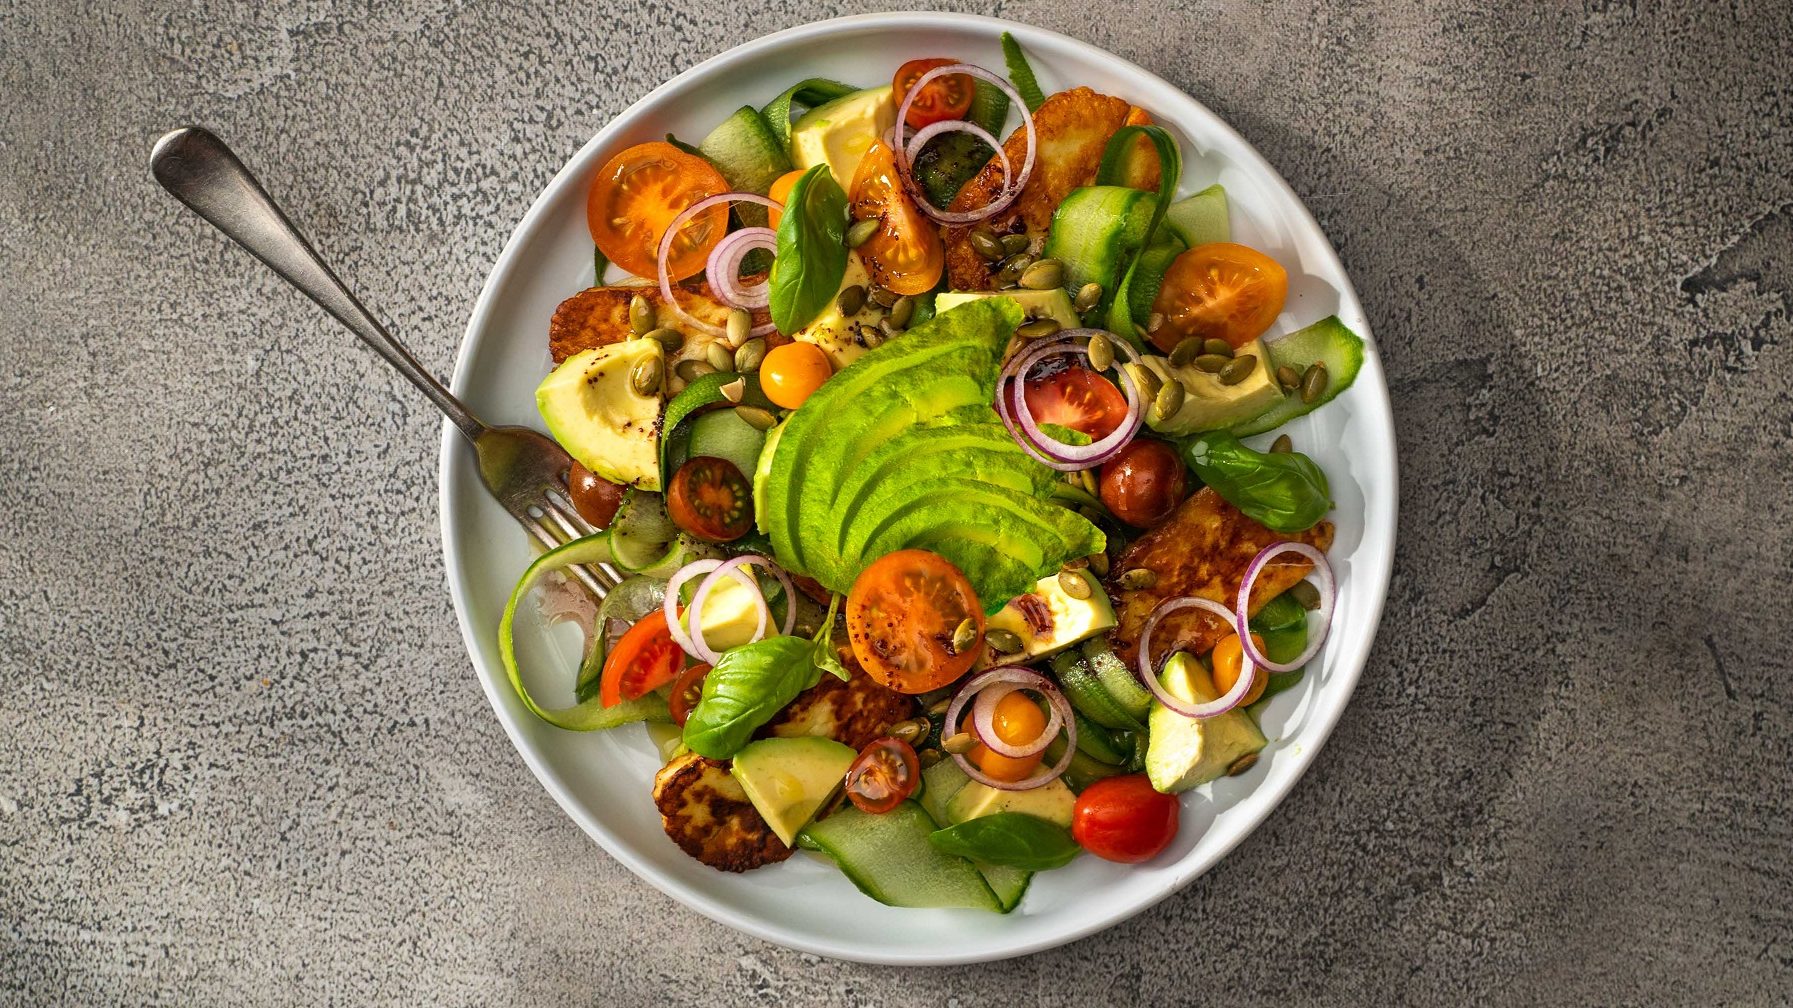 Topdown view of a tomato and avocado salad in a white round bowl with a fork.